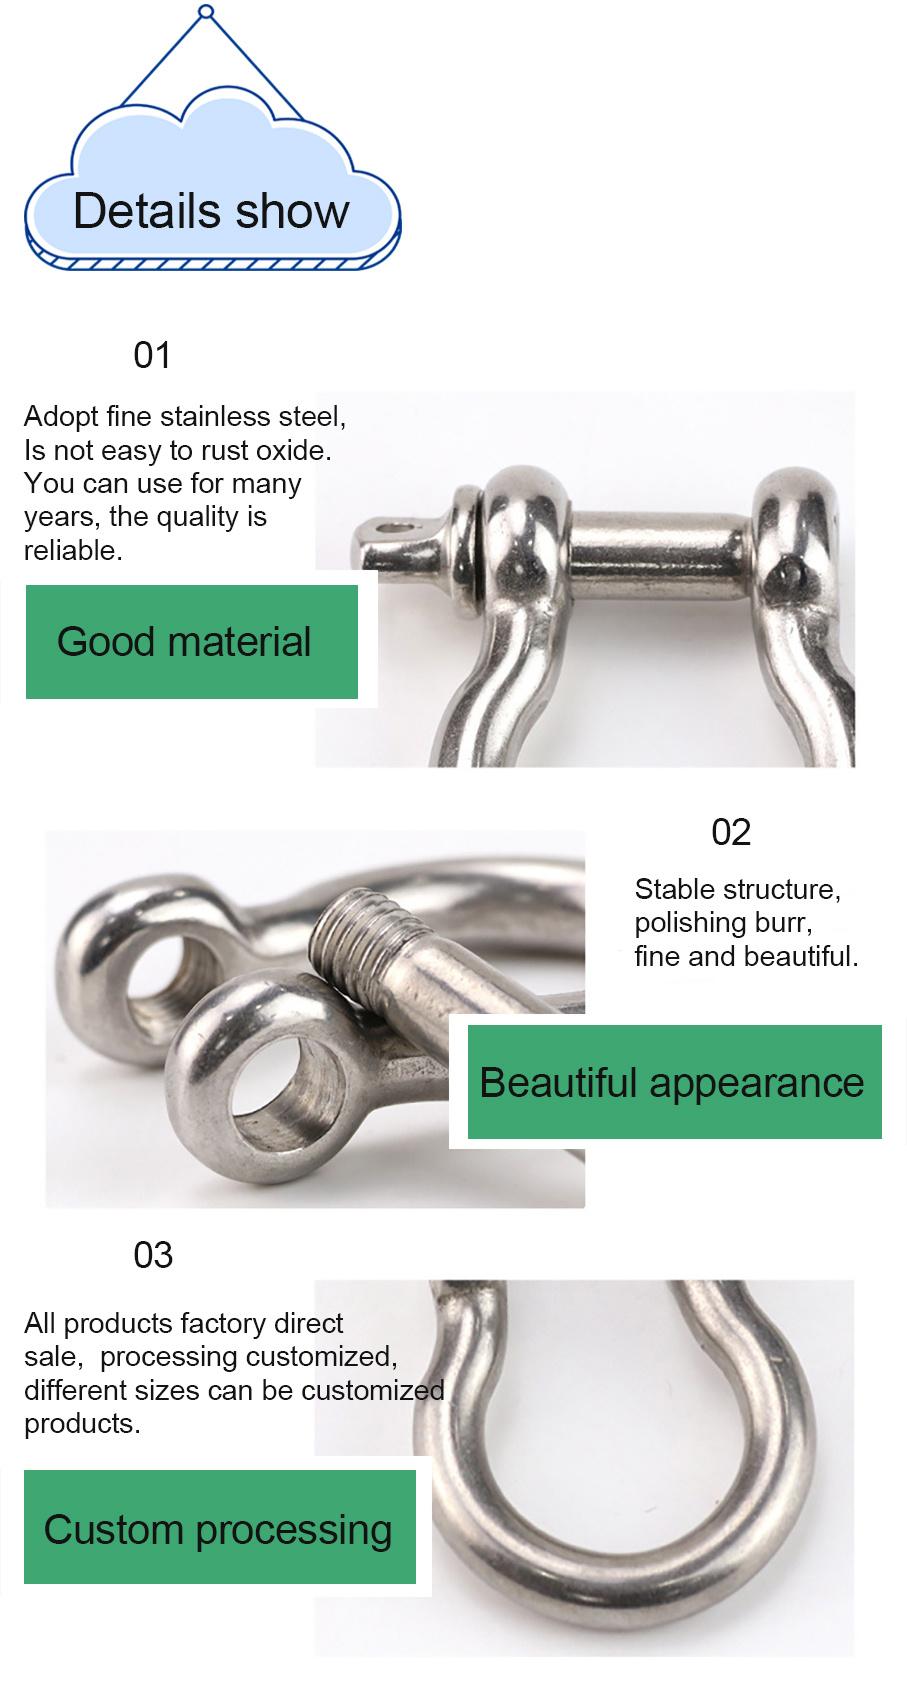 Hot Selling Stainless Steel 304/316 Us Type Straight D Shackle